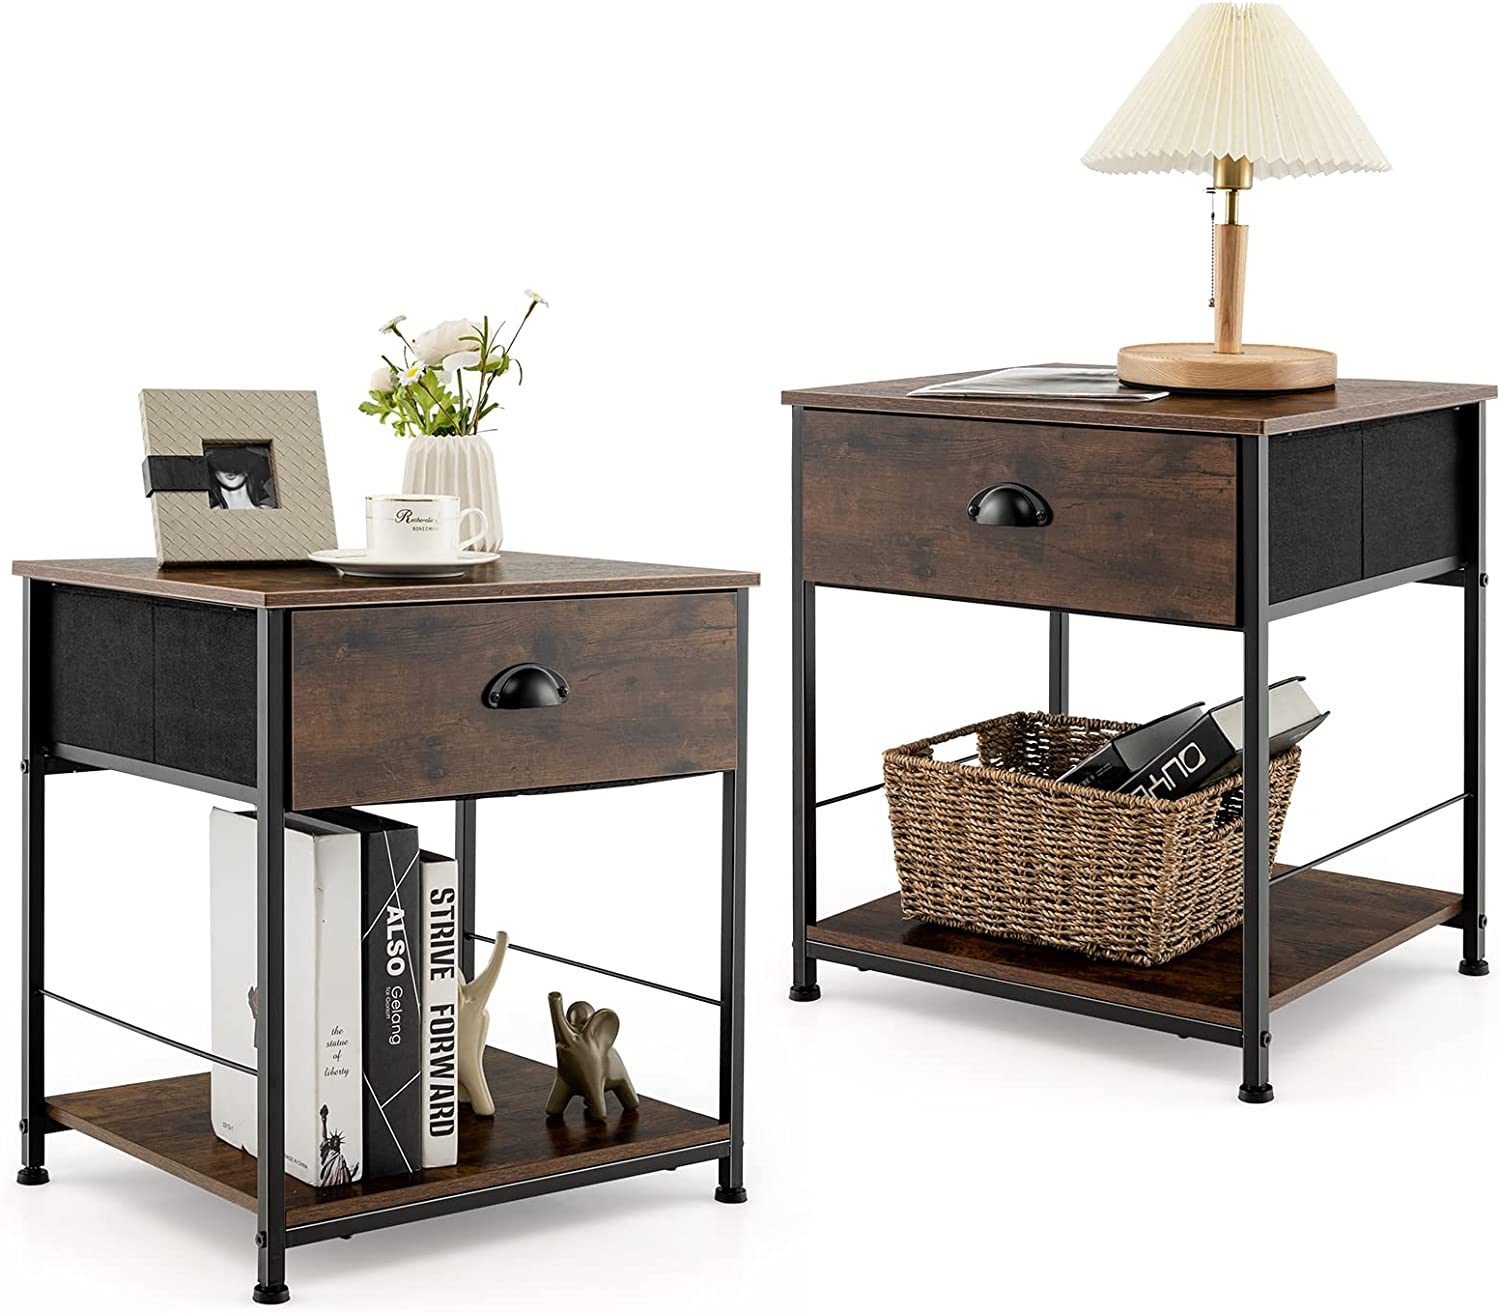 Giantex Nightstand with Drawers, Bedside Table w/Removable Fabric Bins & Pull Handle